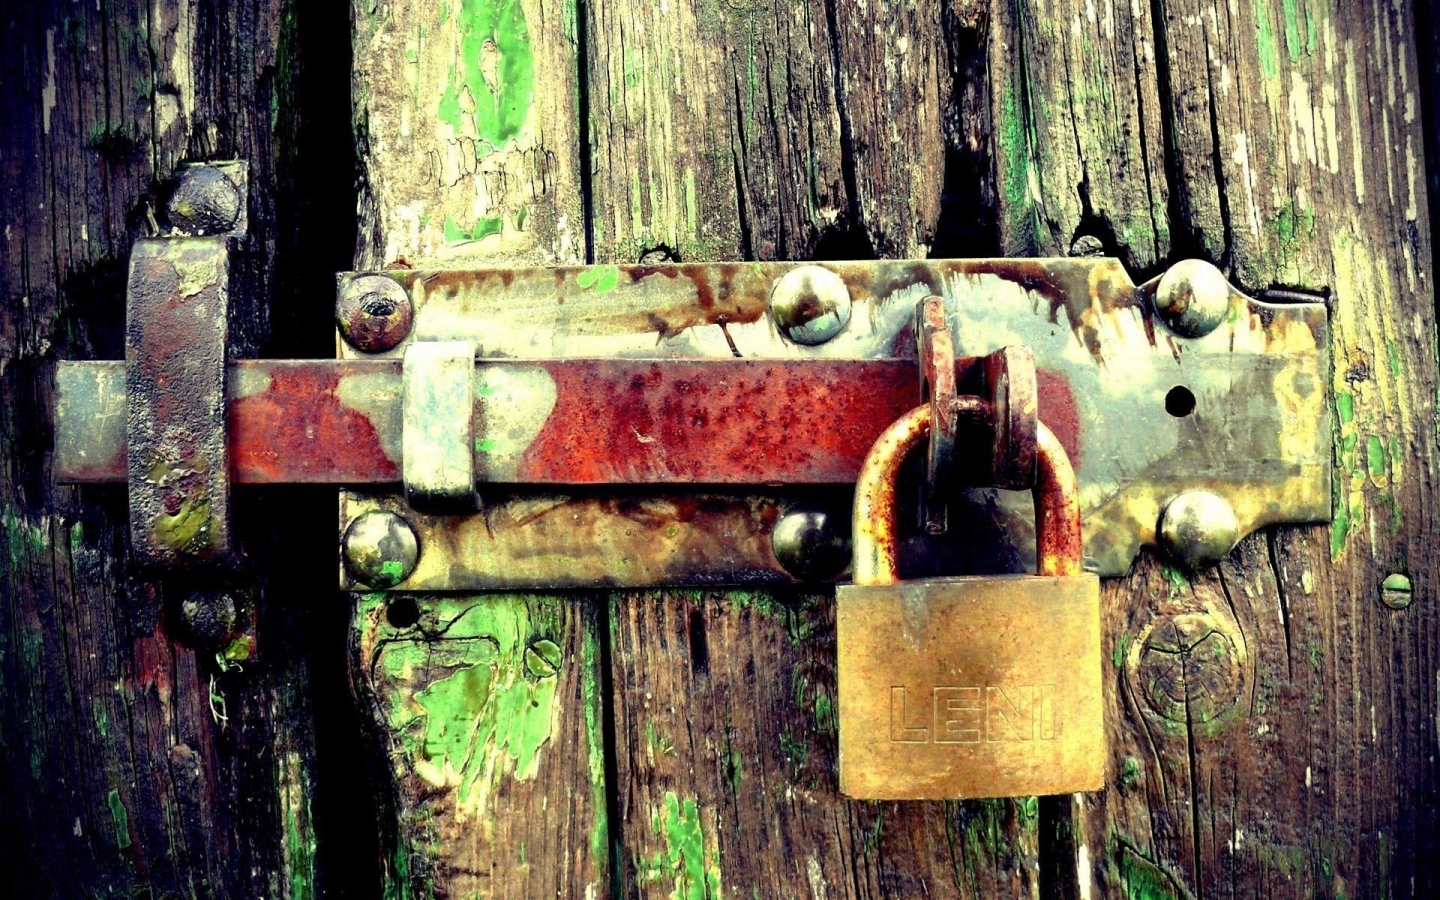 Padlock on the gate for 1440 x 900 widescreen resolution